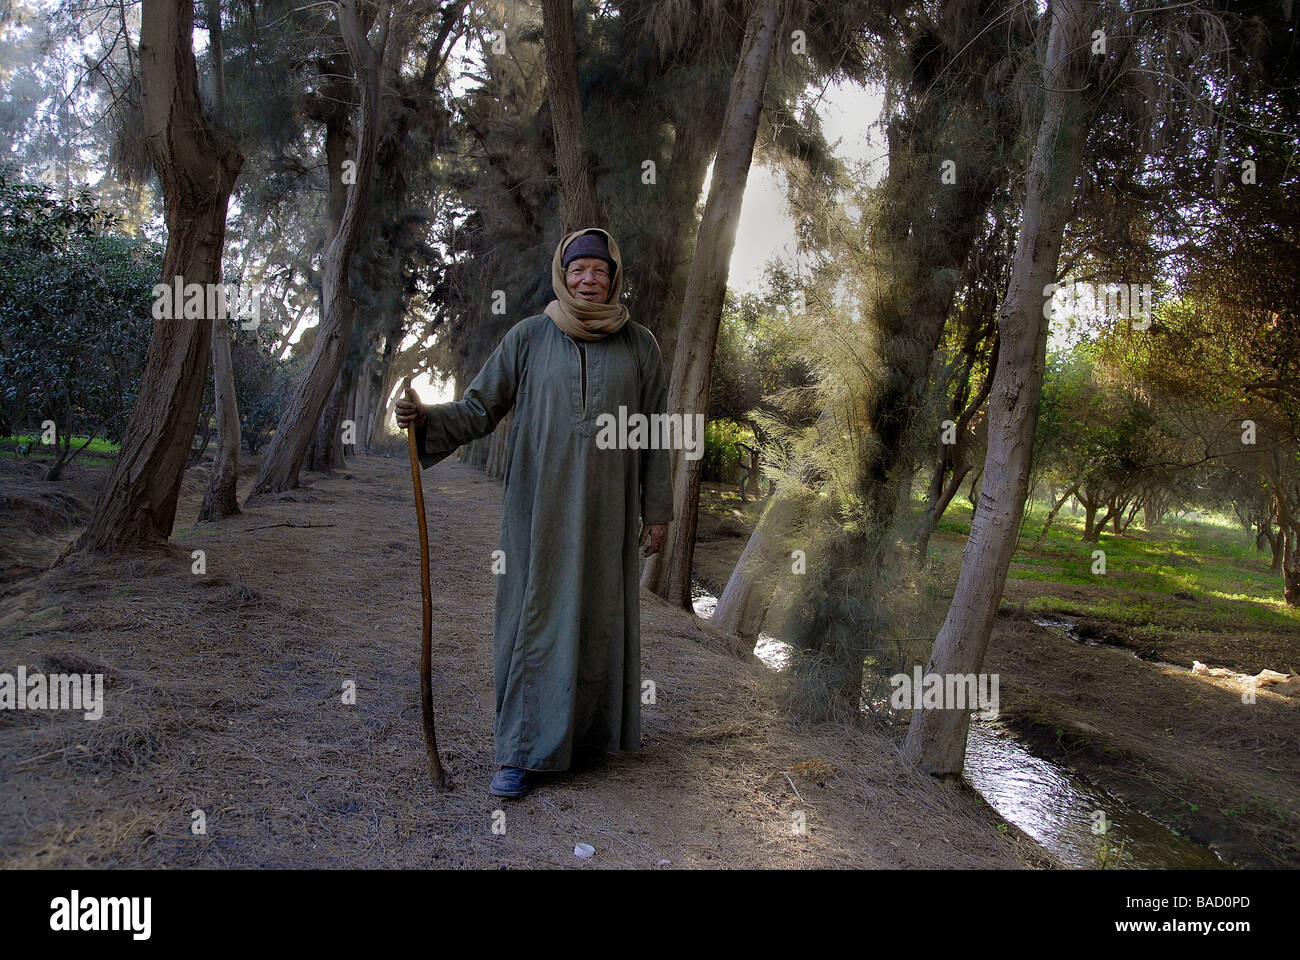 This ex-leper is strong enough to work on one of the leprosy grounds, a small forest with olive trees and cactus plants Stock Photo